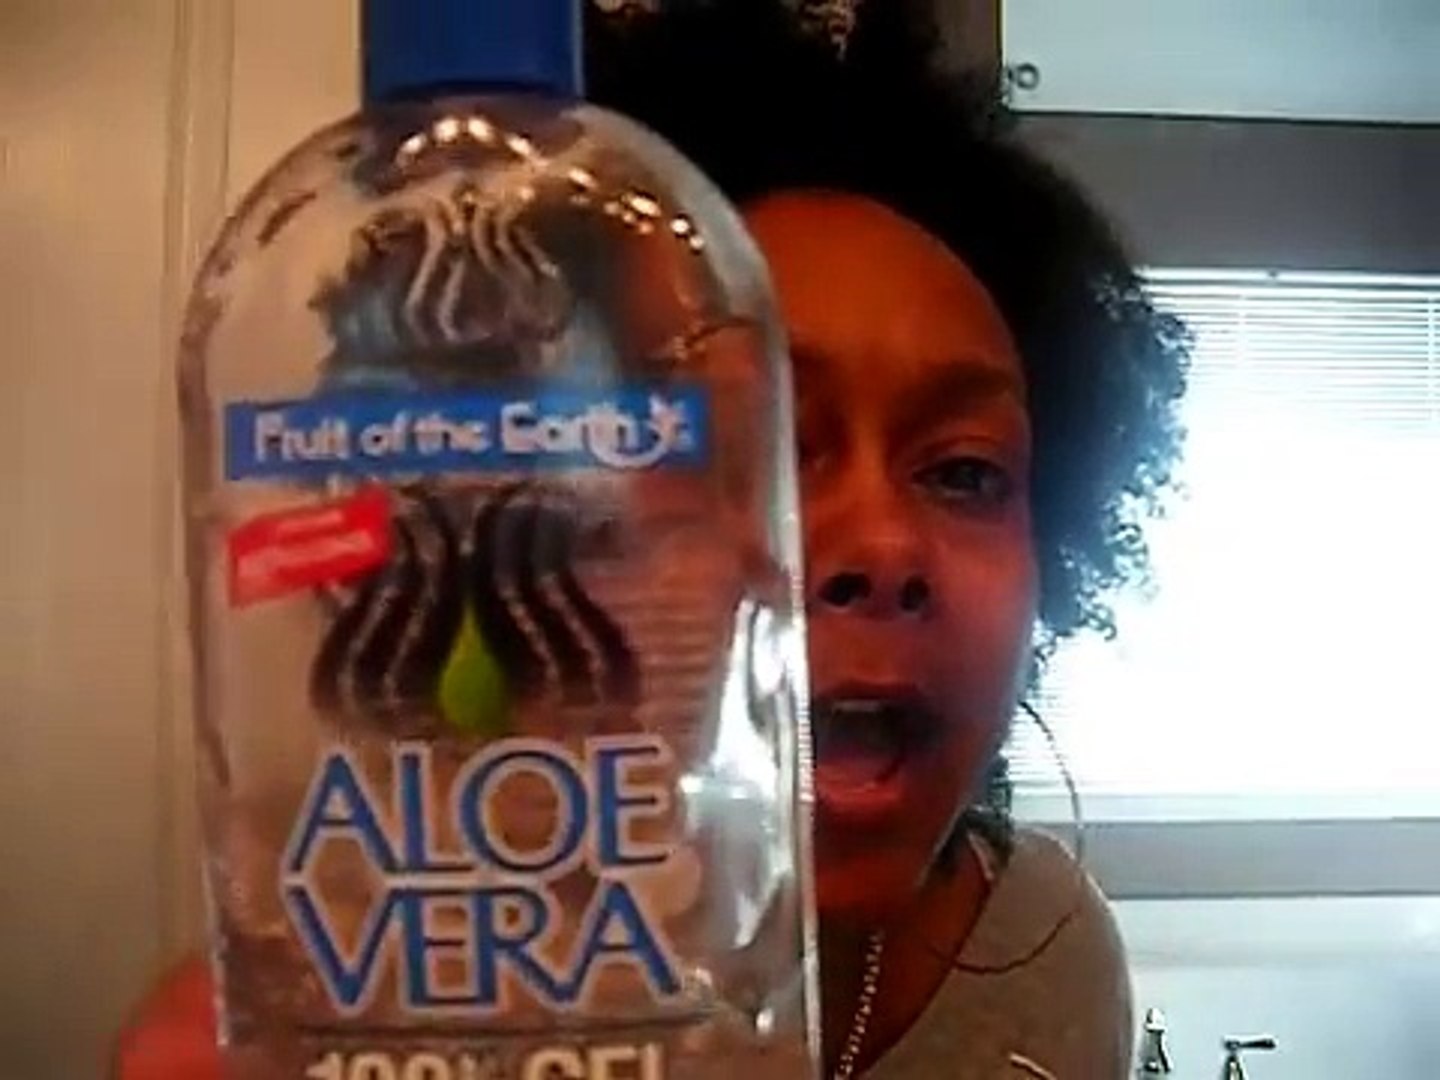 NOBODY TOLD ME! Fruit of The Earth Aloe Vera Gel - video Dailymotion